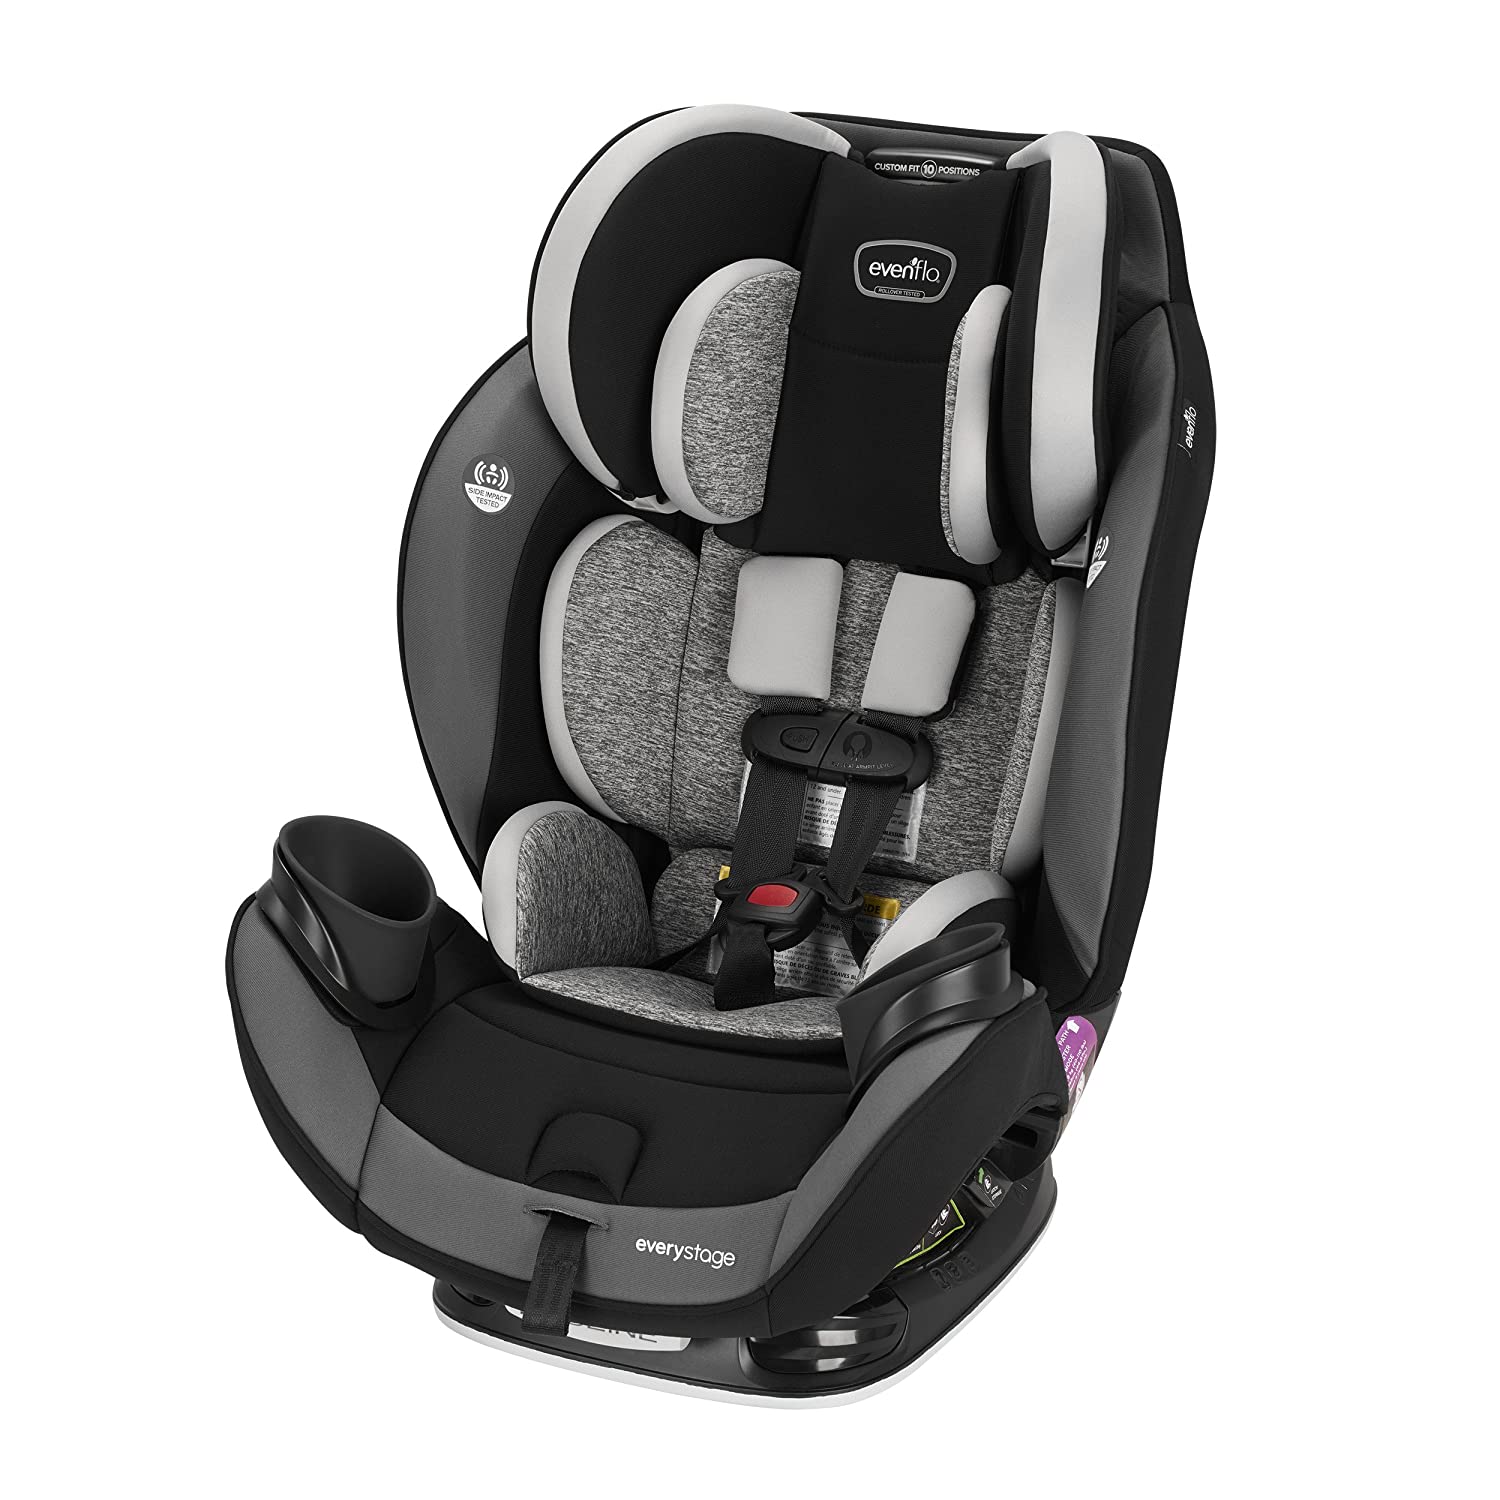 Best Car Seat for 2 Year Old Evenflo 3in1 harnessed